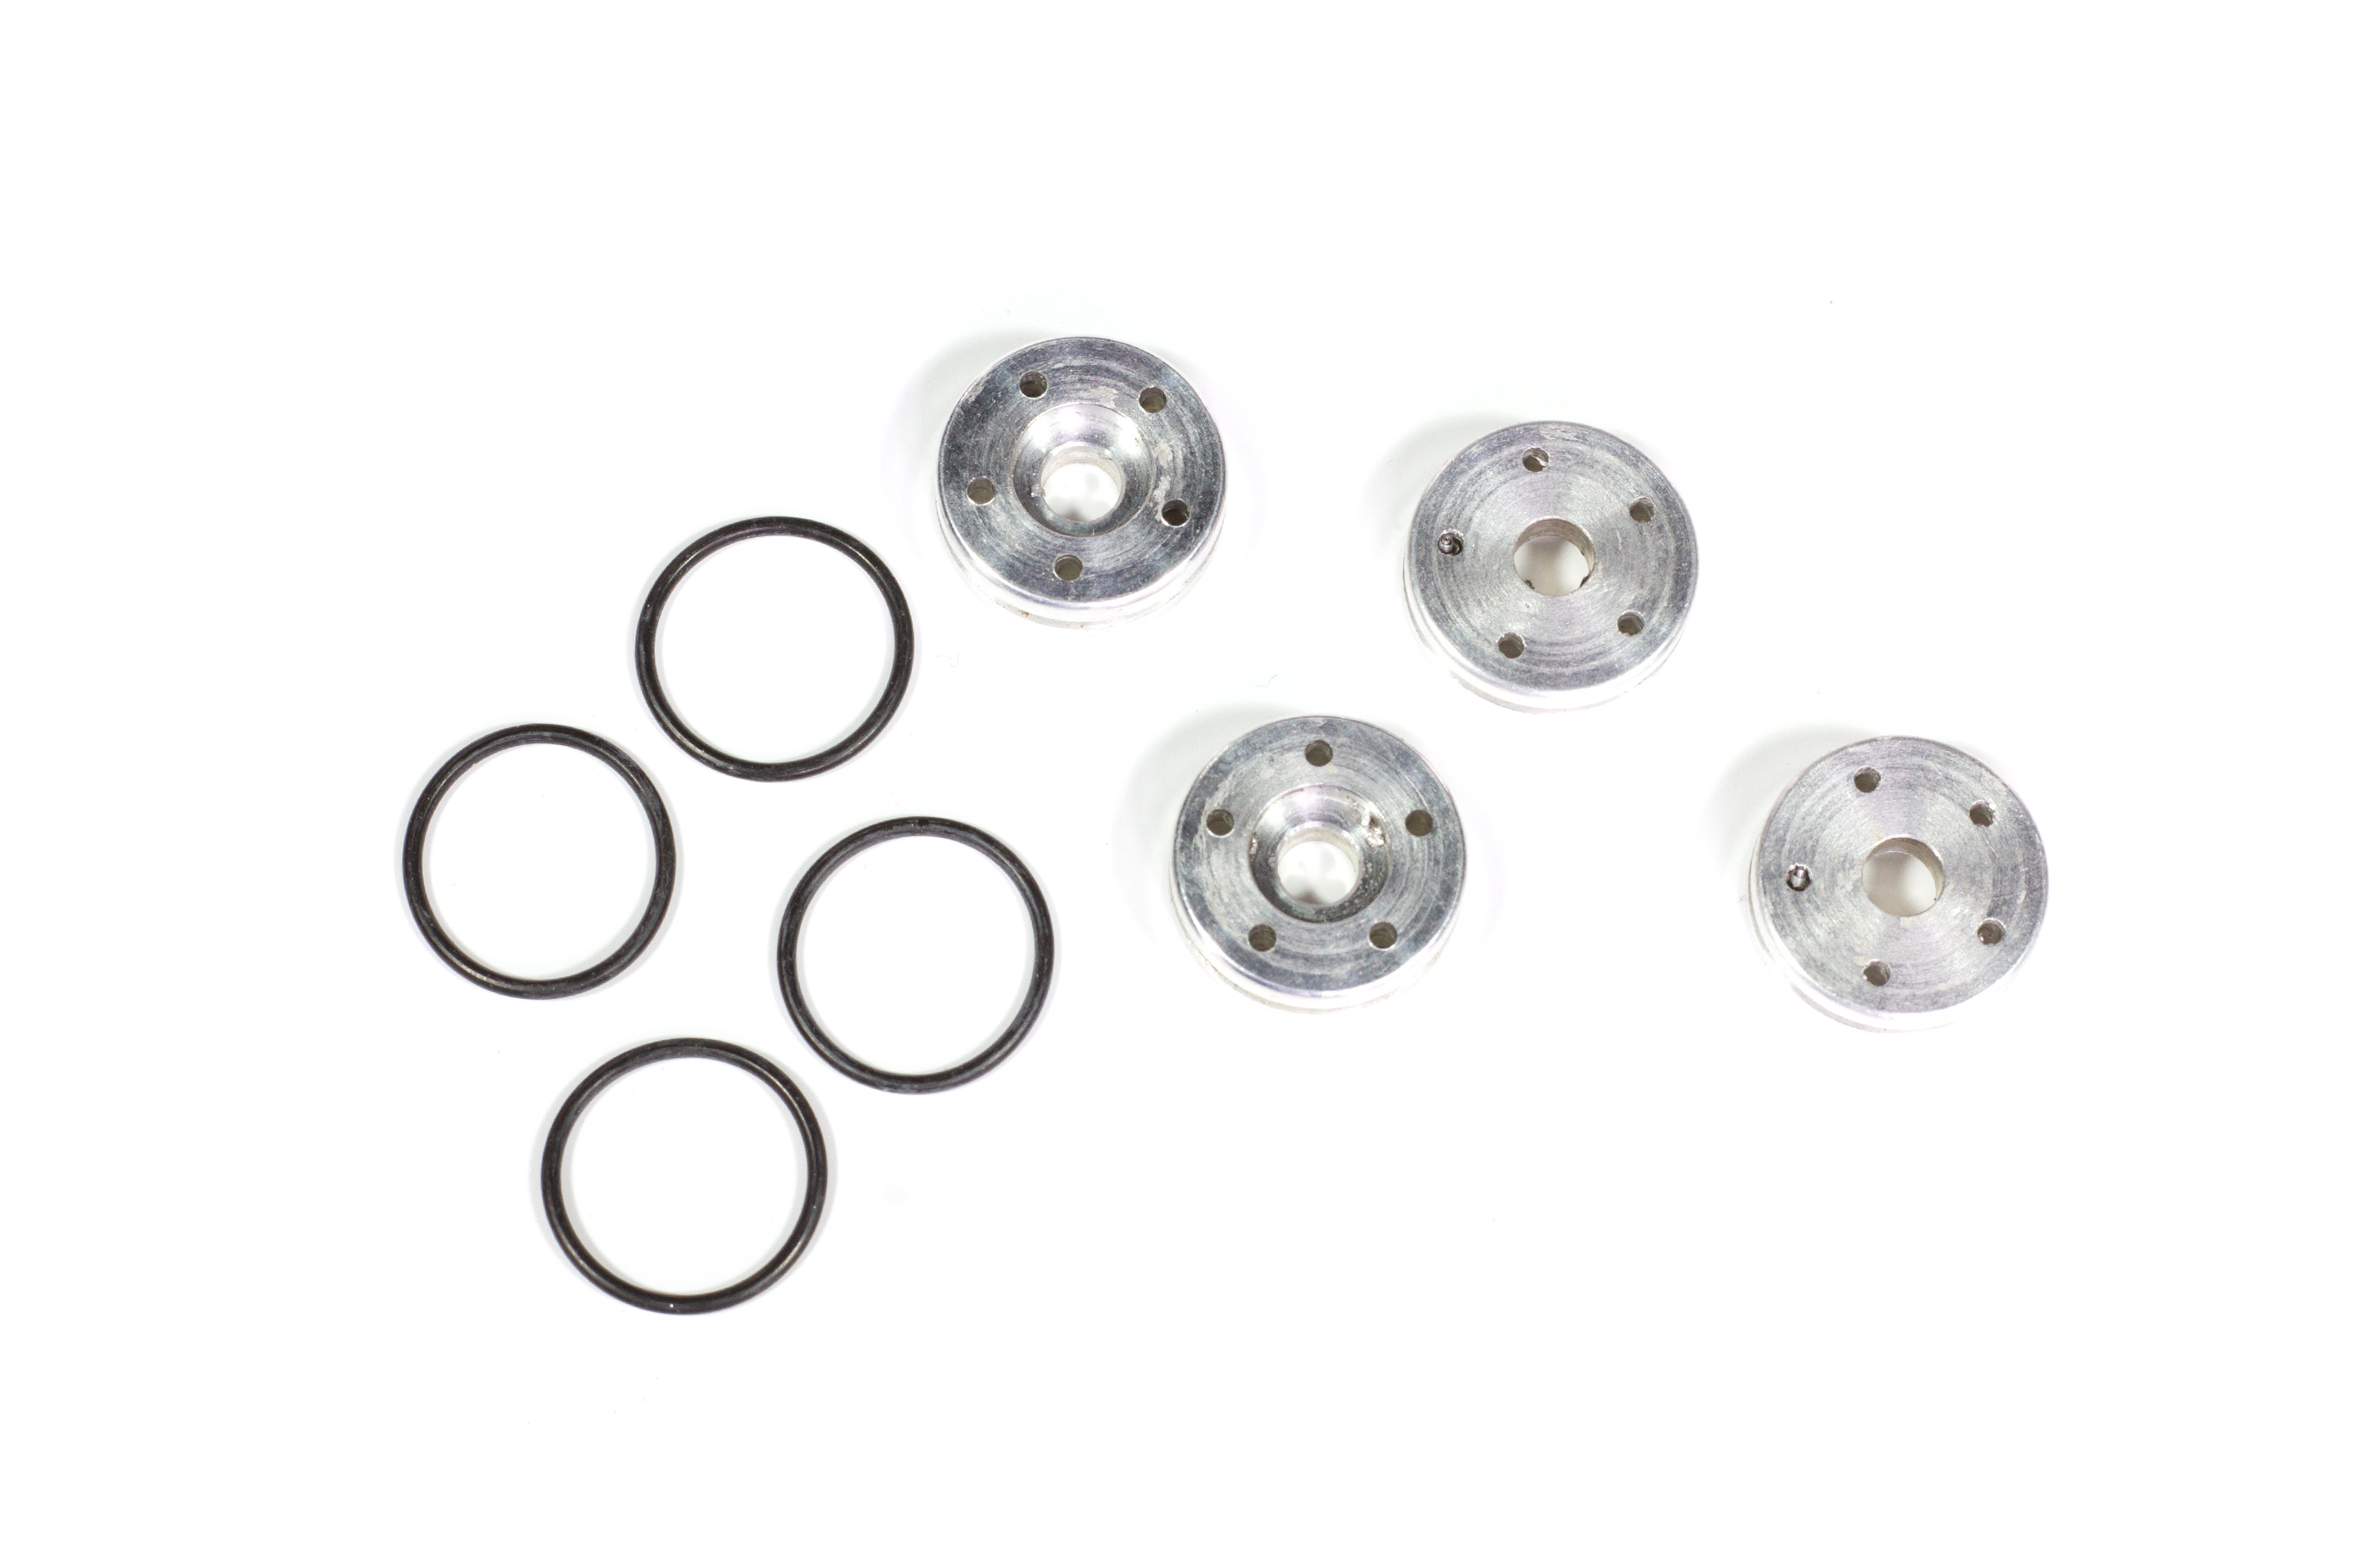 y19047/01 Alloy shock pistons for buggy shocks